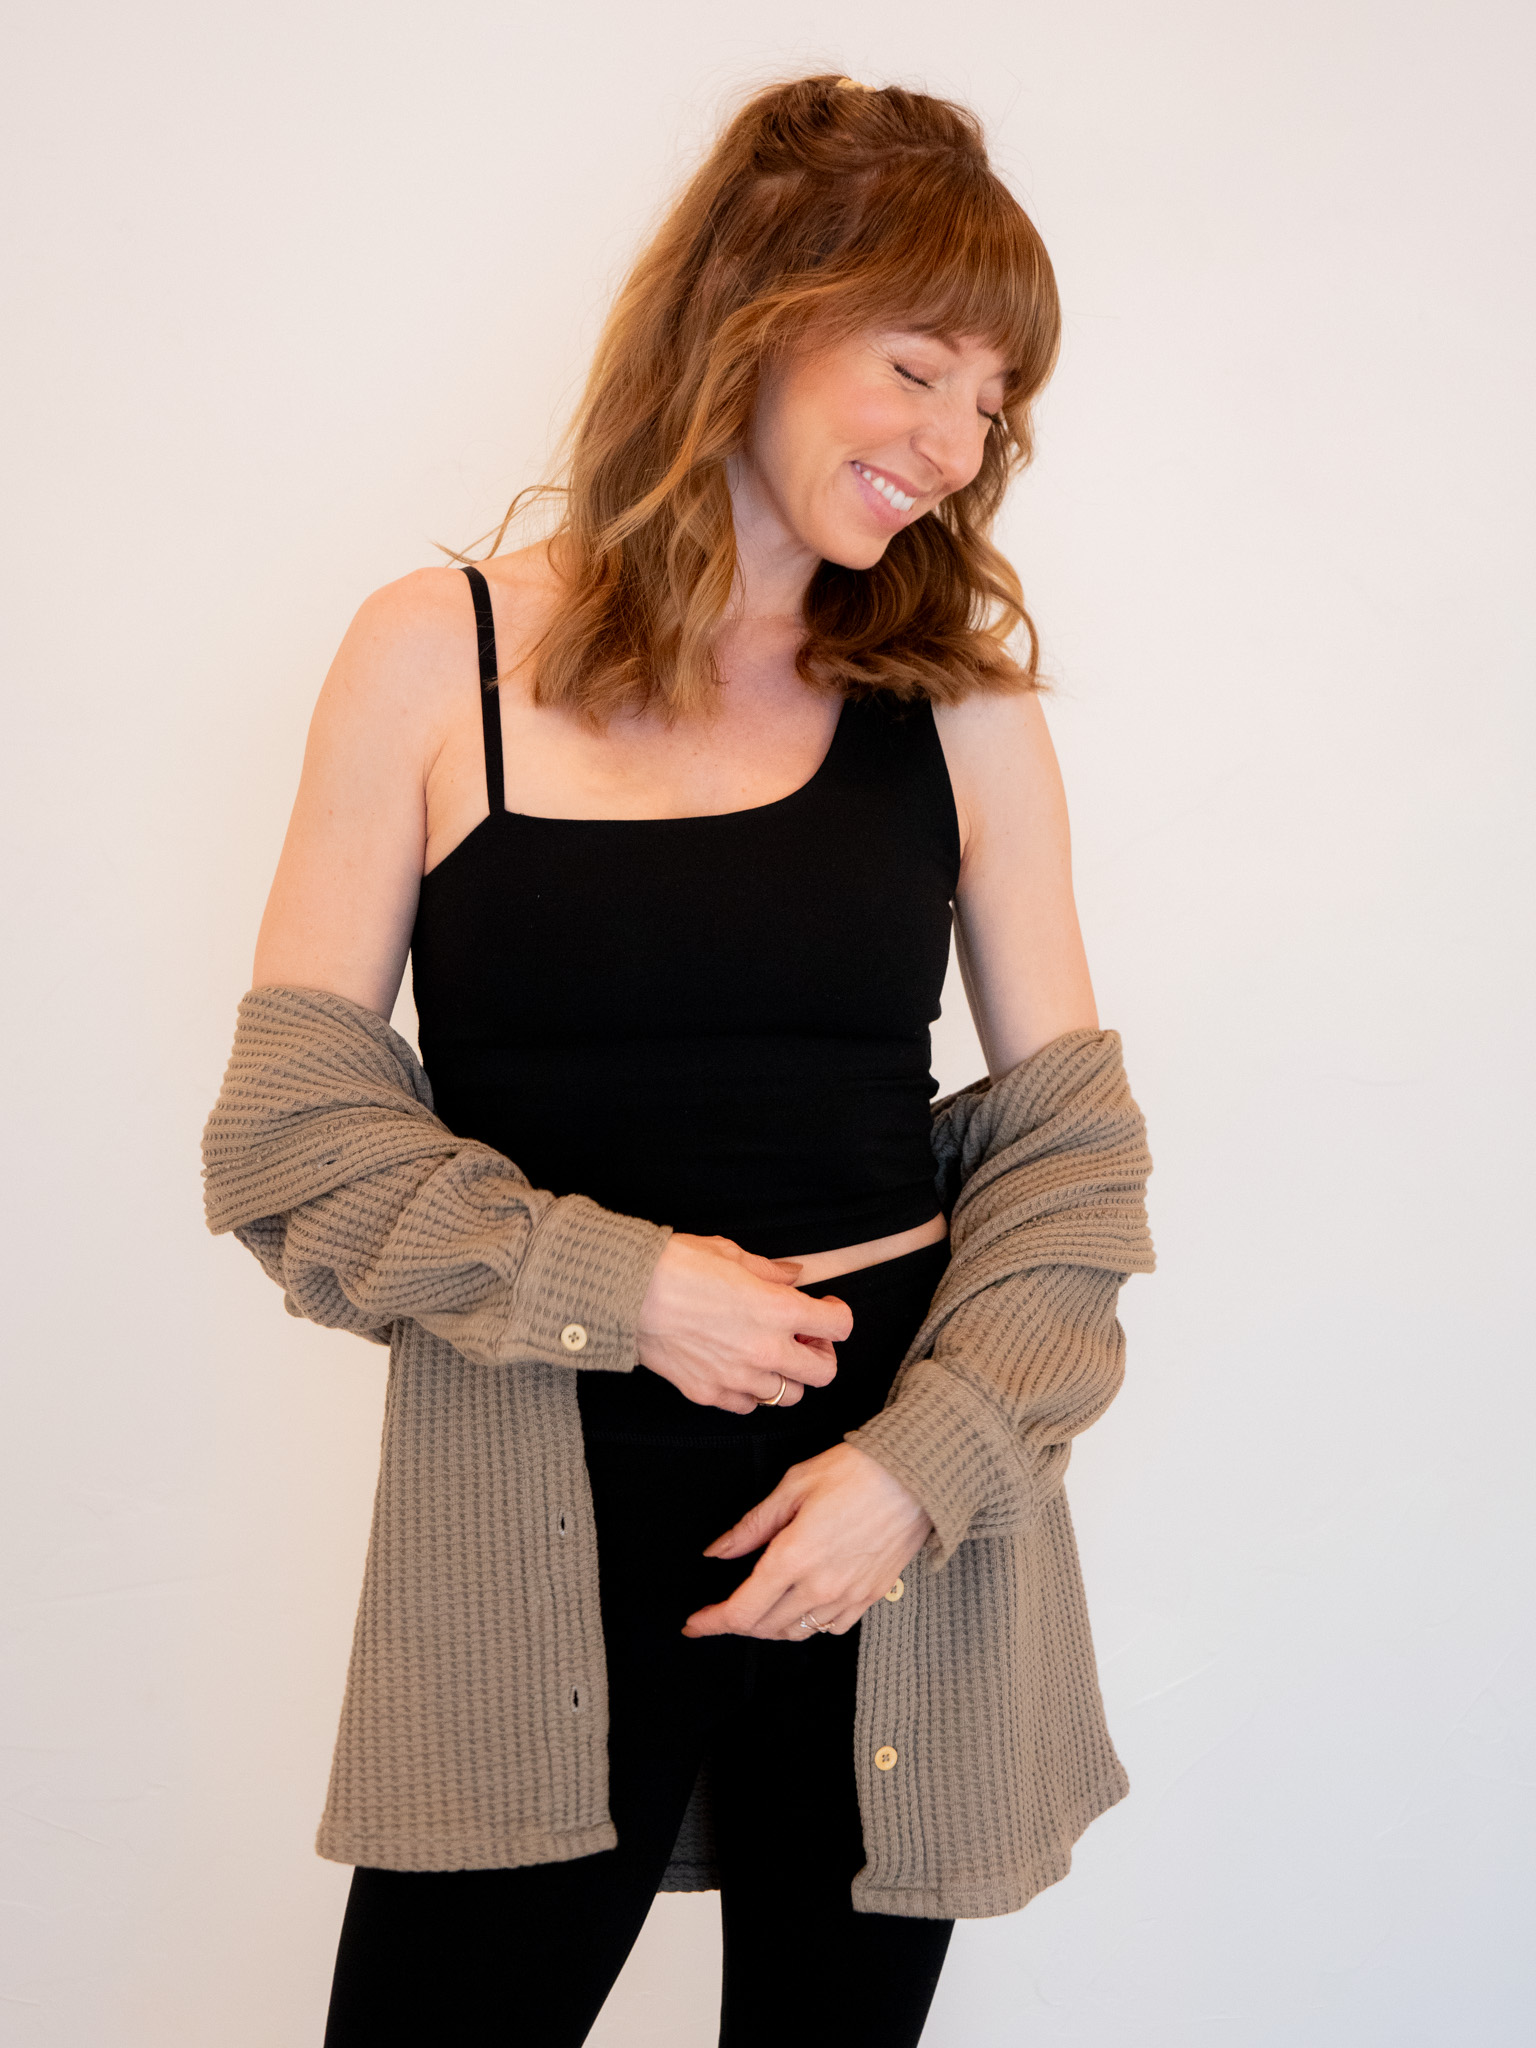 A smiling woman with long brown hair, wearing a black tank top and a beige cardigan, standing against a white background.